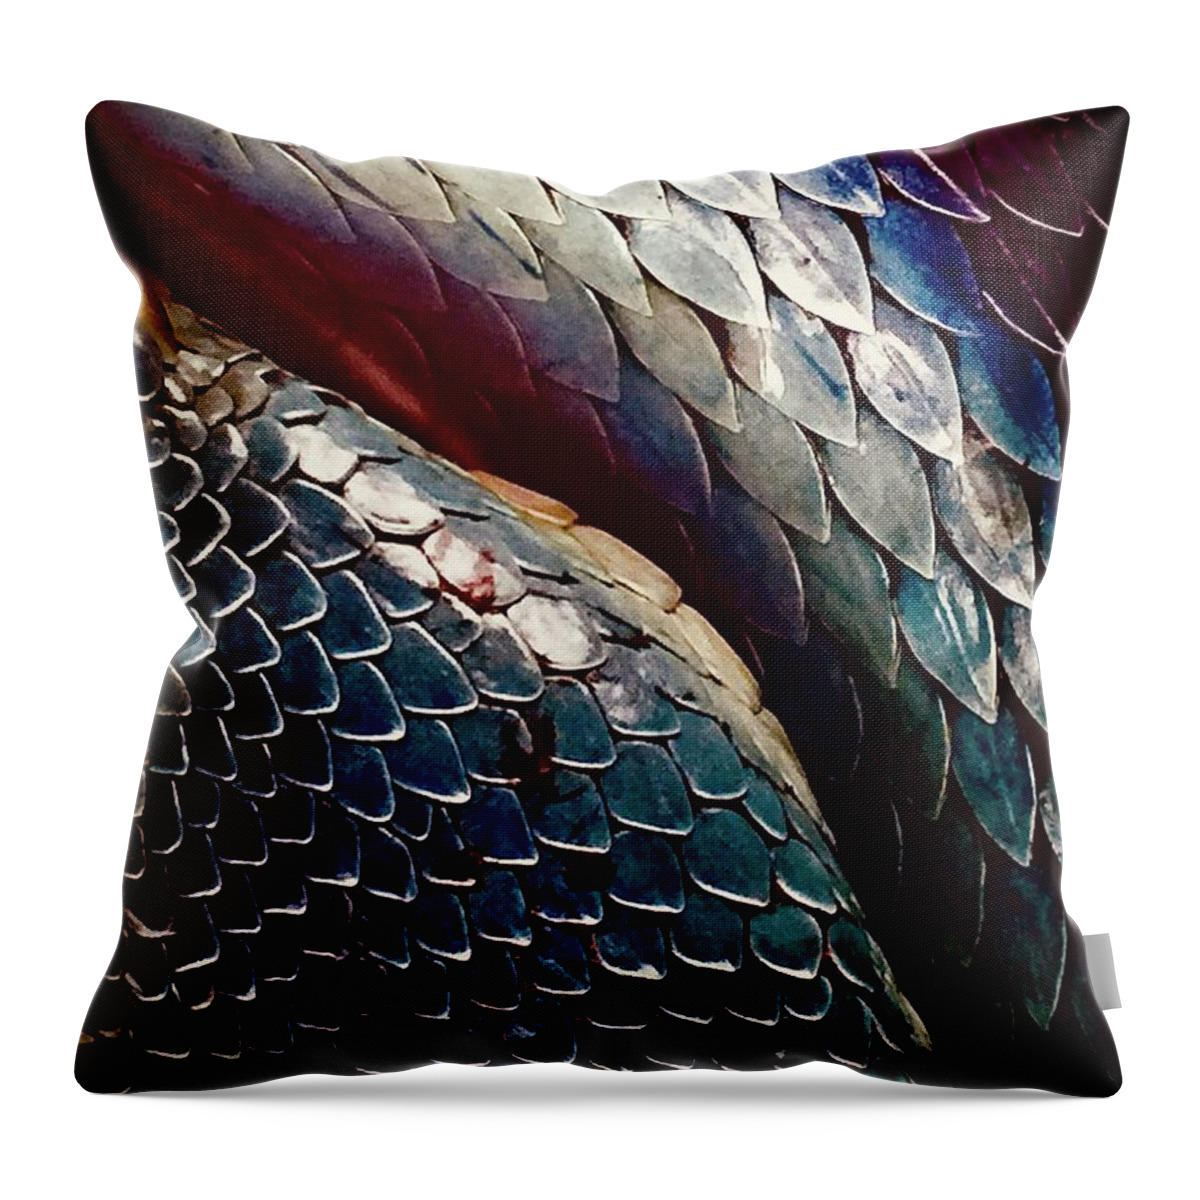 Reptile Throw Pillow featuring the photograph Scales by Kerry Obrist